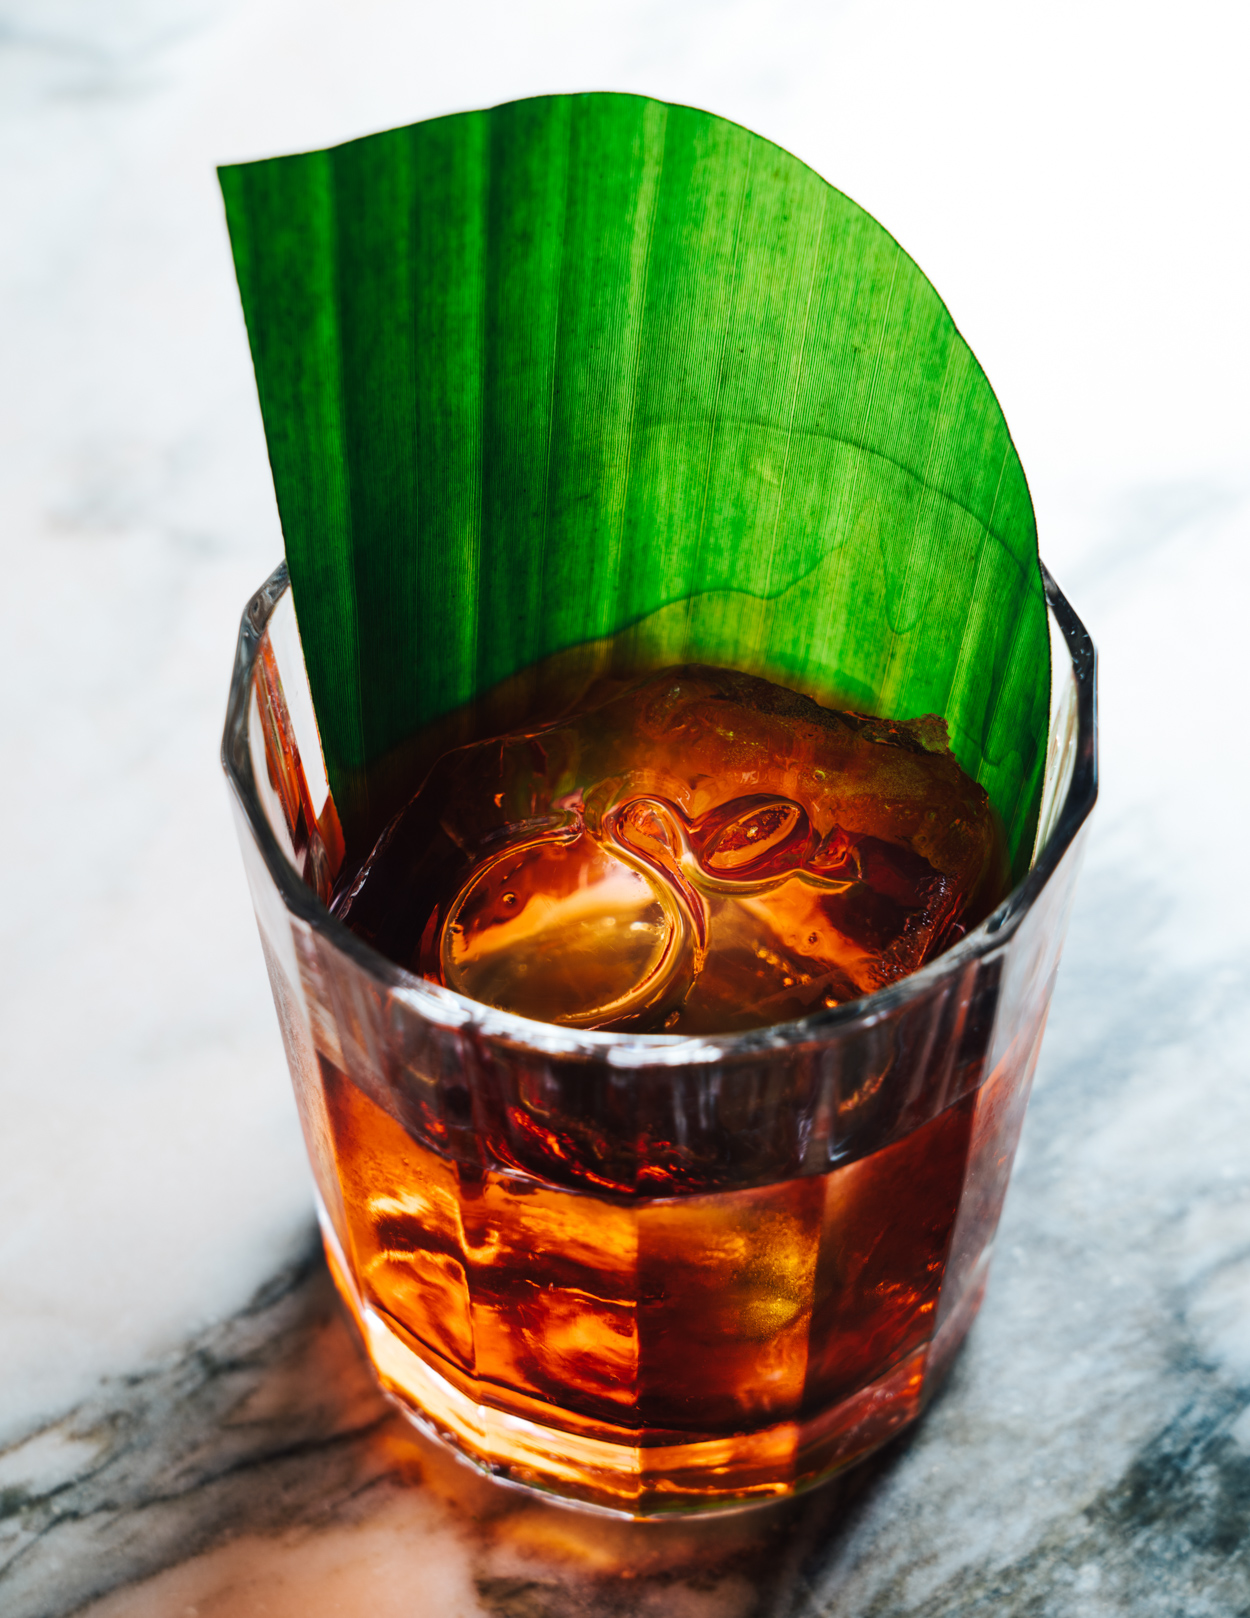 Los Angeles Food photographer - Cocktail with banana leaf photographed at Curtis Stone